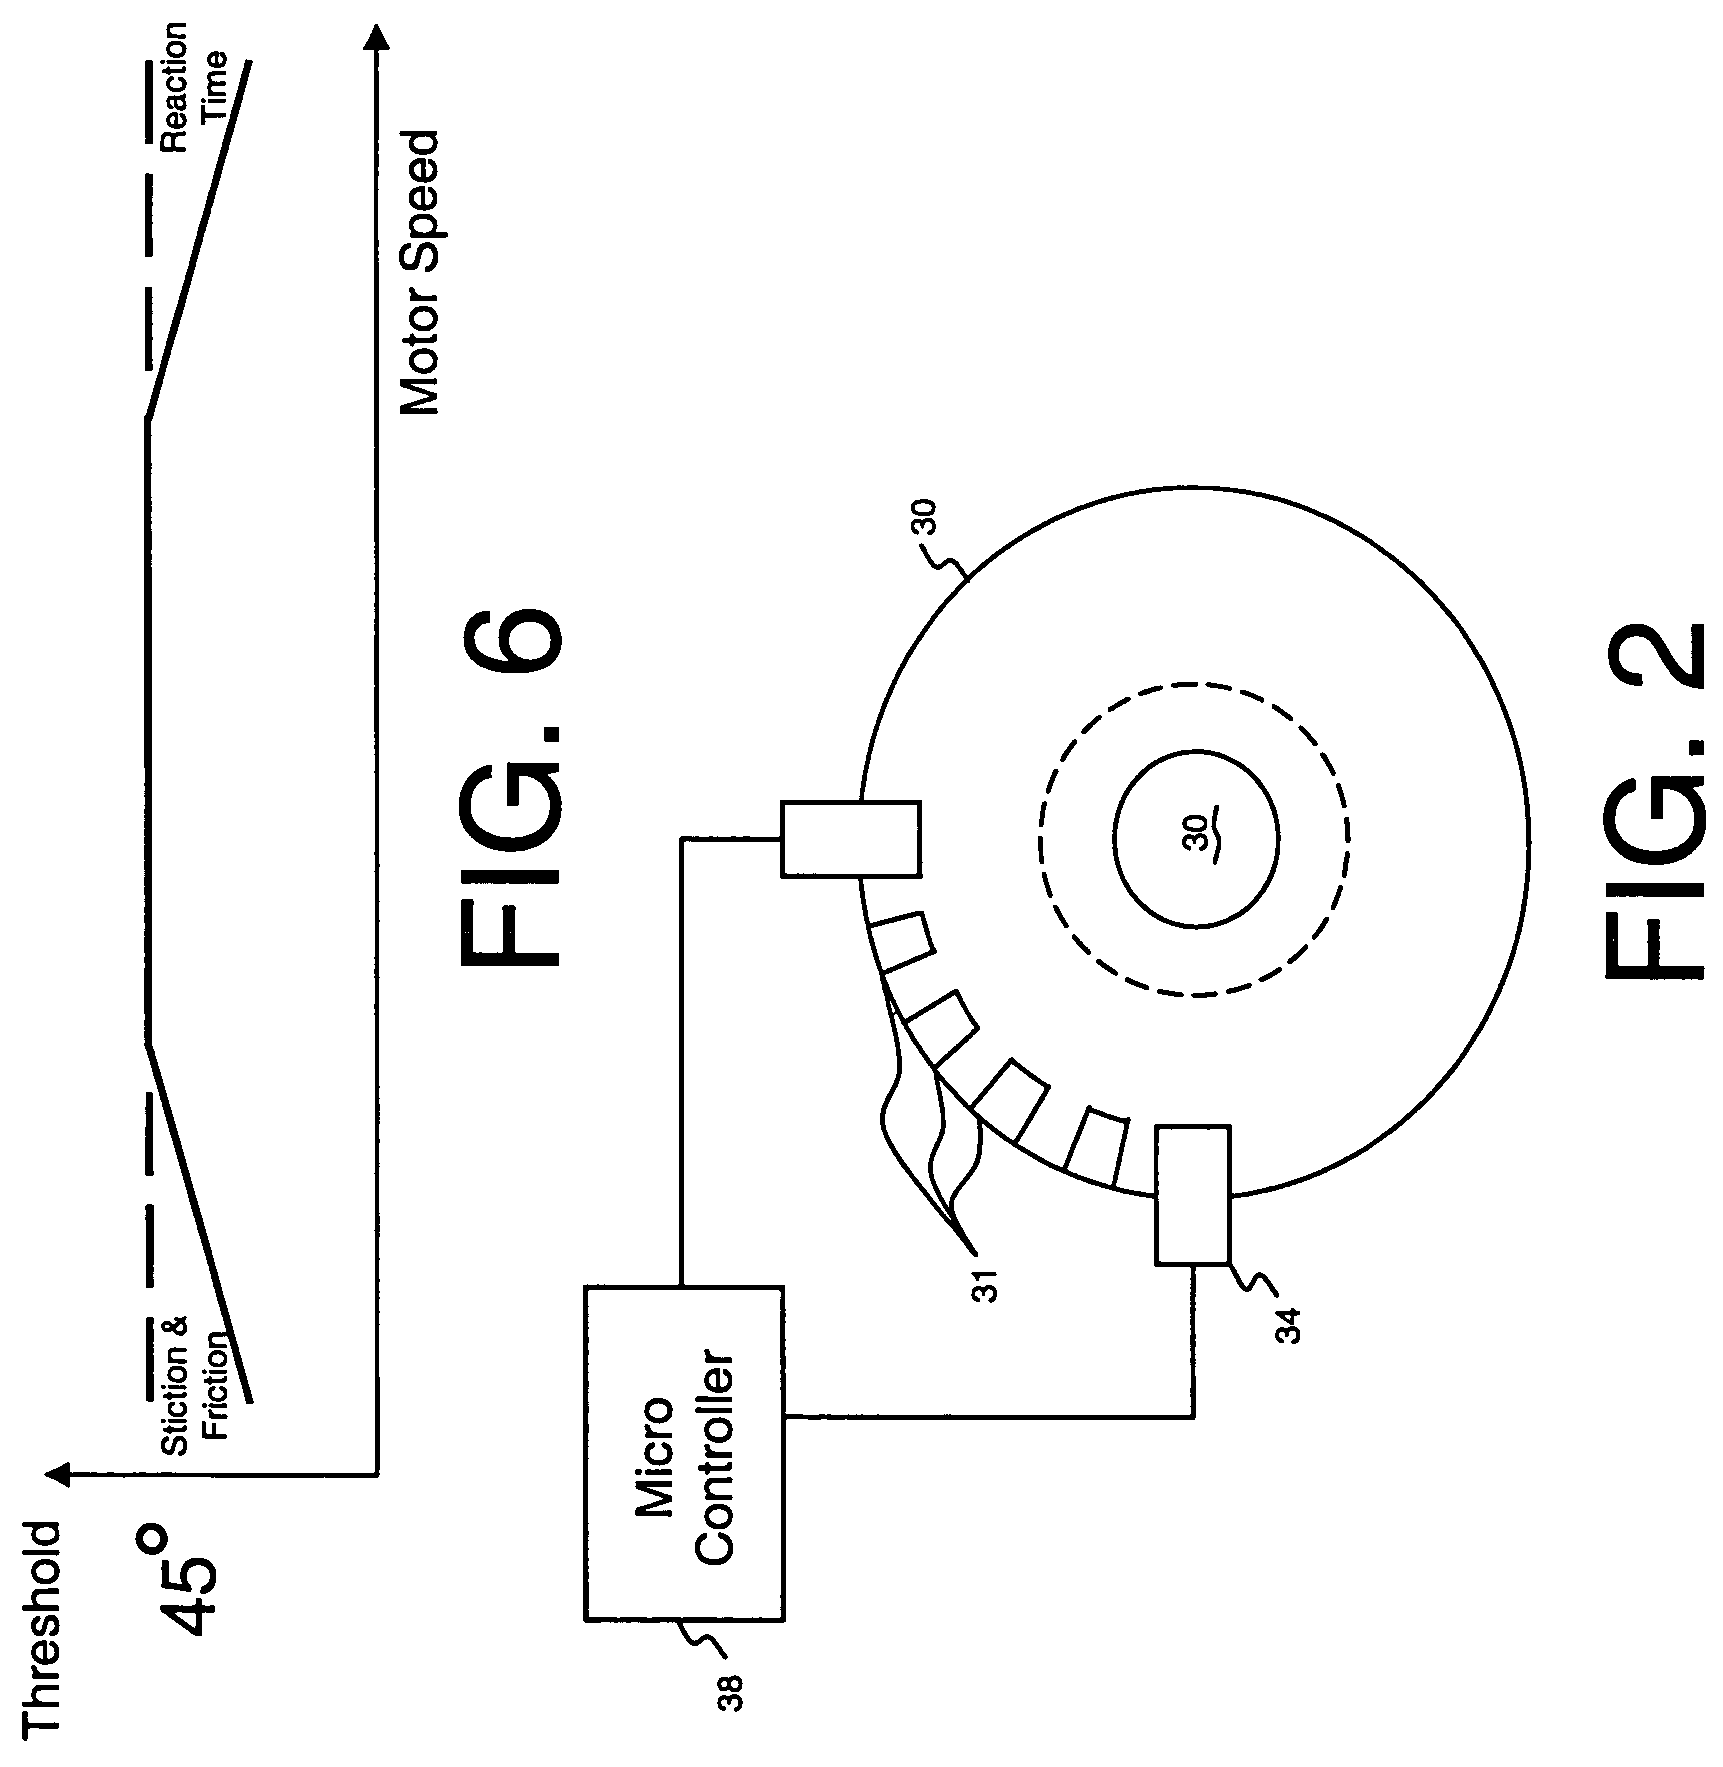 Method for detecting a bit jam condition using a freely rotatable inertial mass